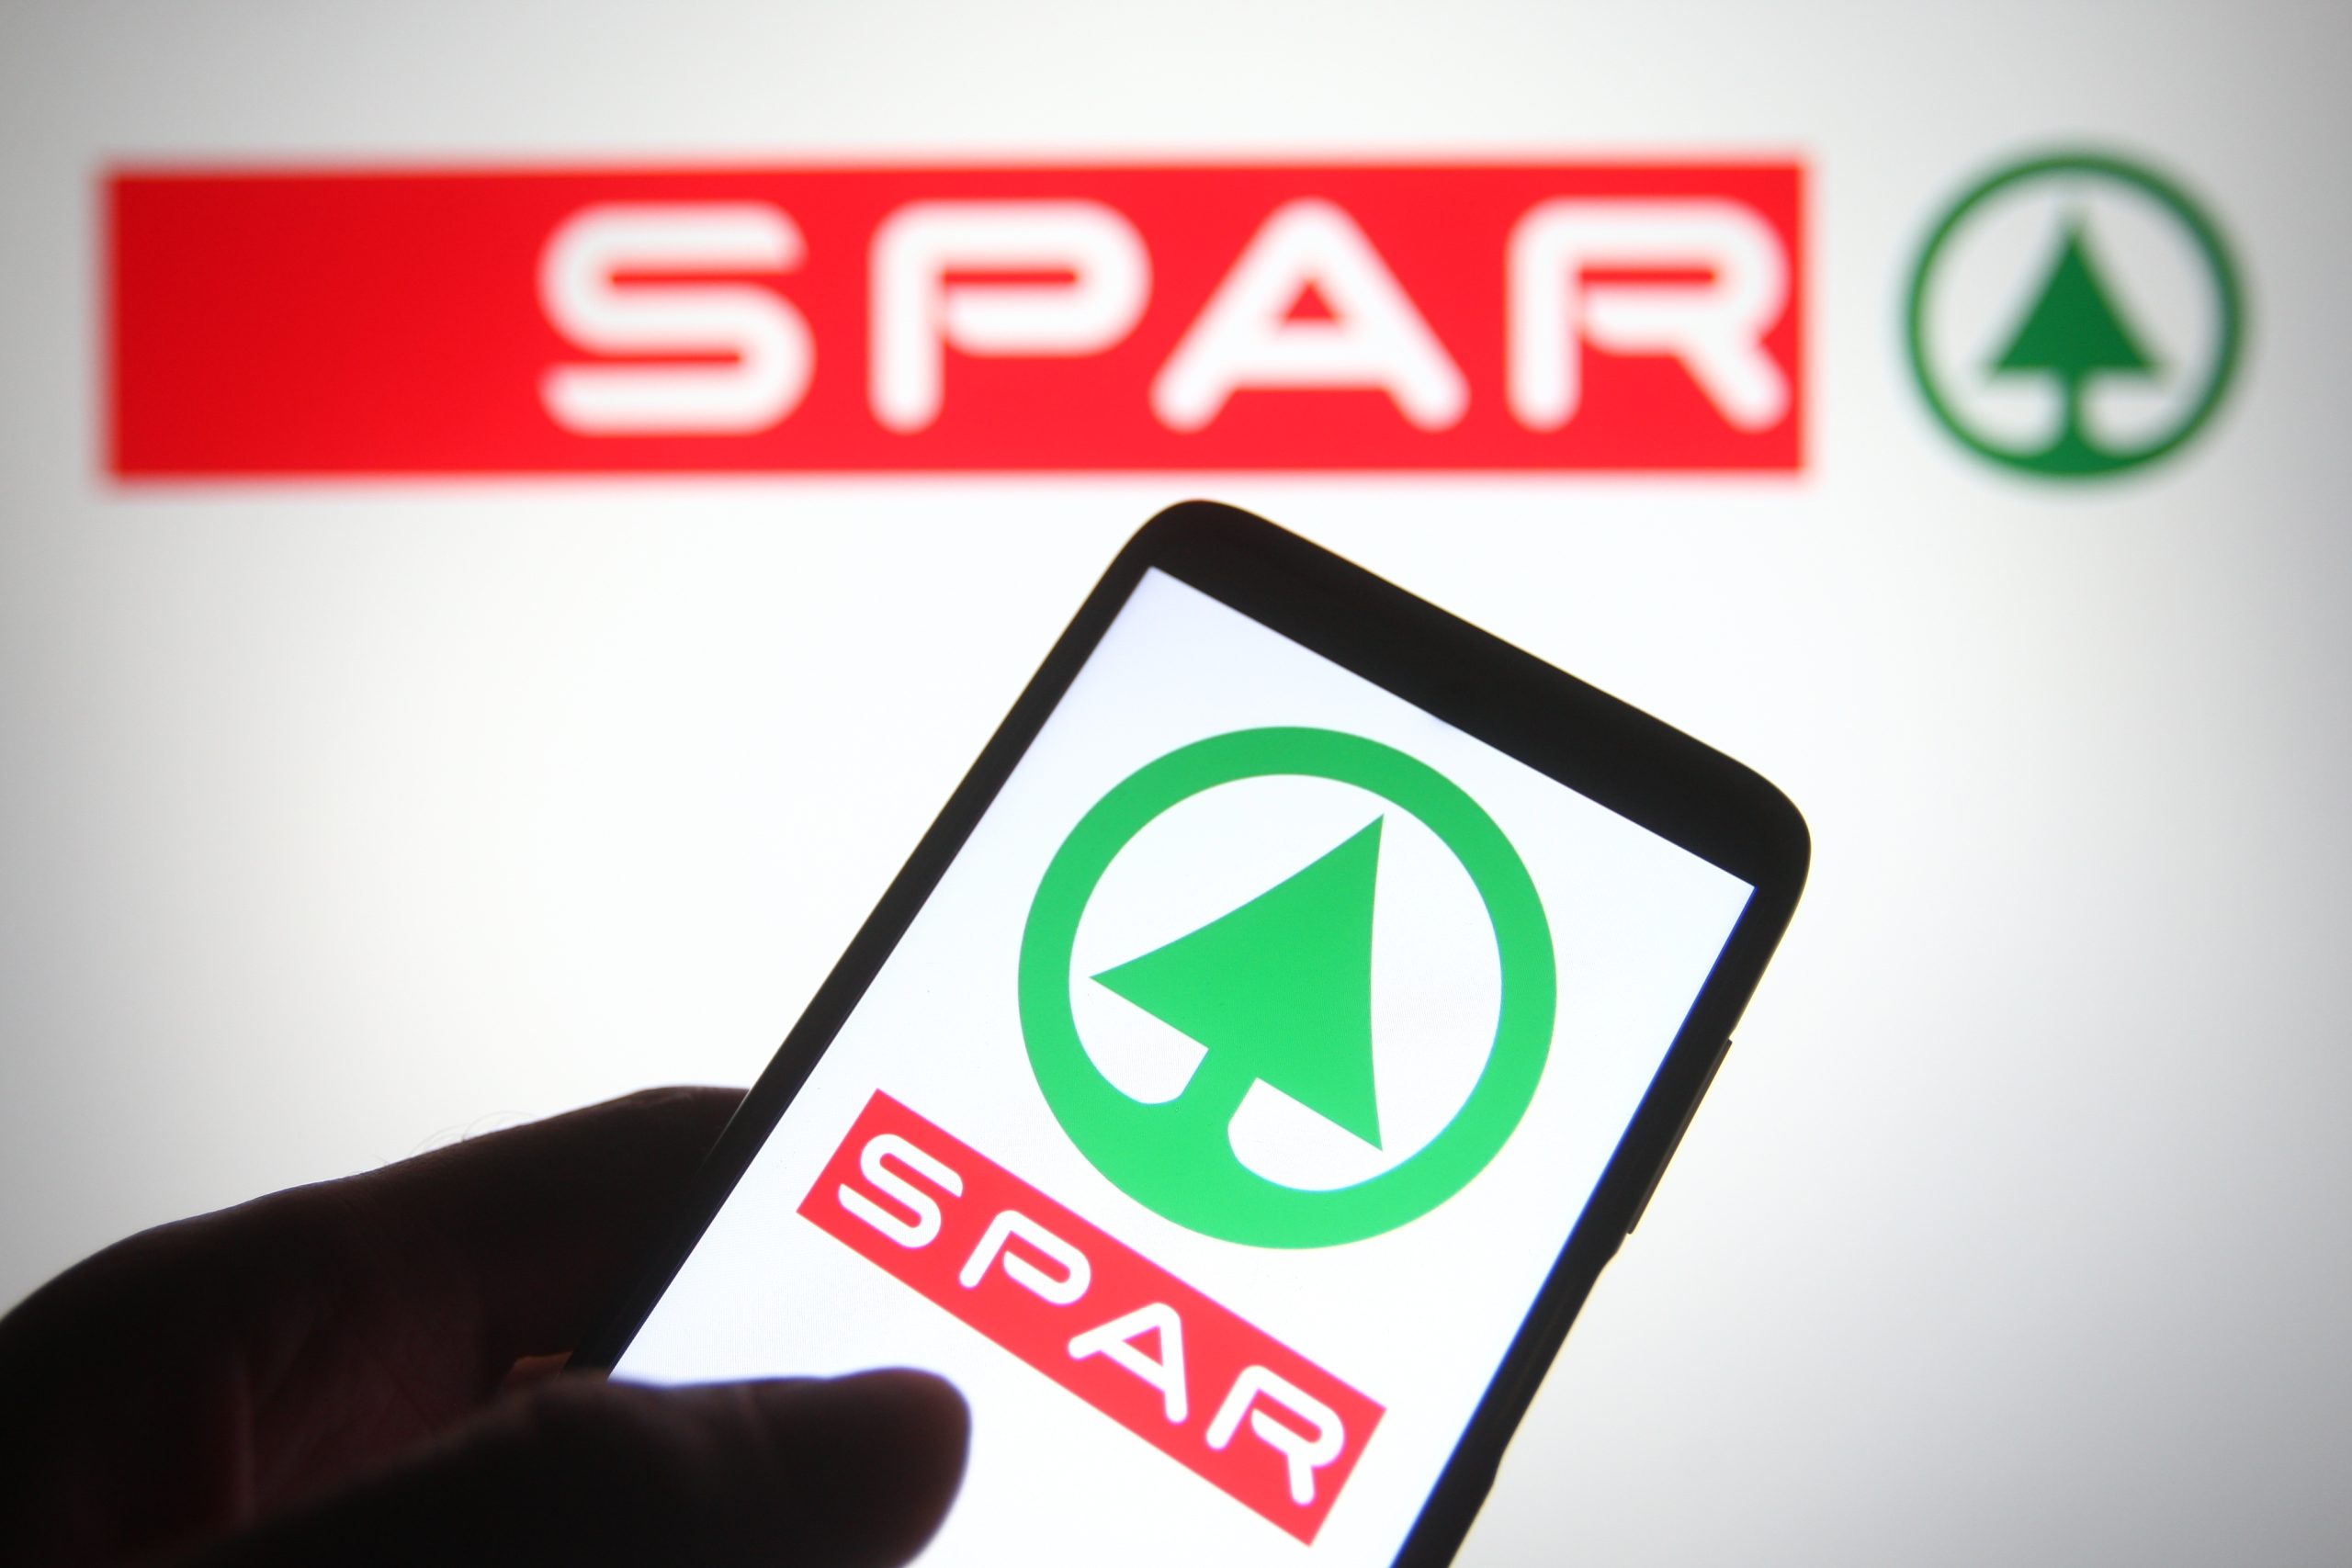 Dublin based VisionR teams up with SPAR to leverage insights across 48 countries